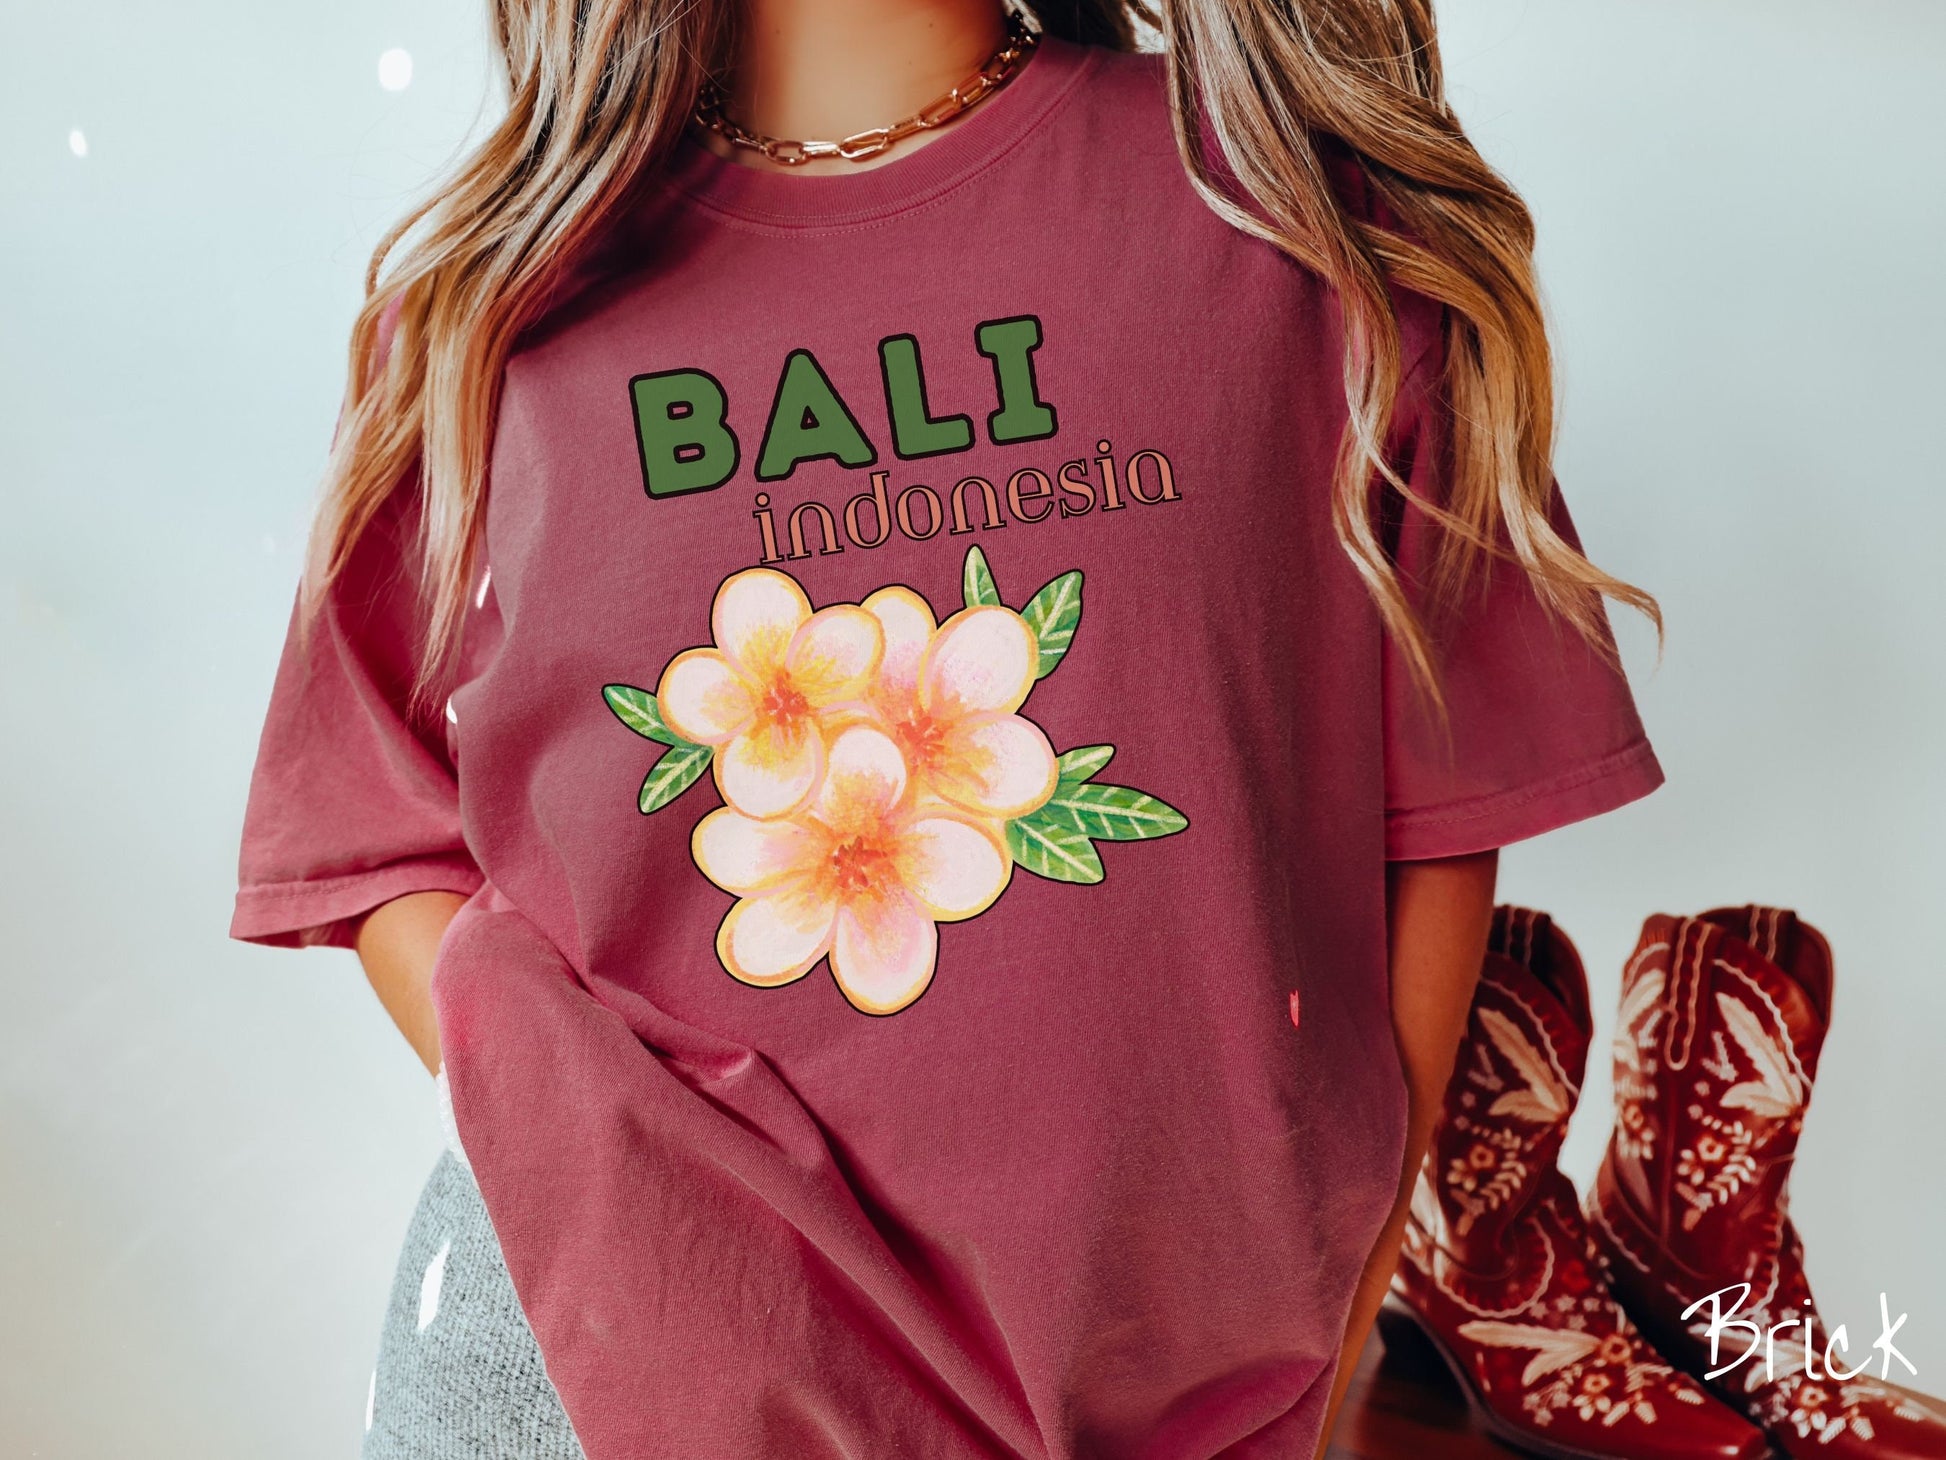 A woman wearing a vintage, brick colored shirt with the text Bali Indonesia in green and yellow font, respectively, and a picture underneath of three beautiful yellow and orange flowers with green leaves.